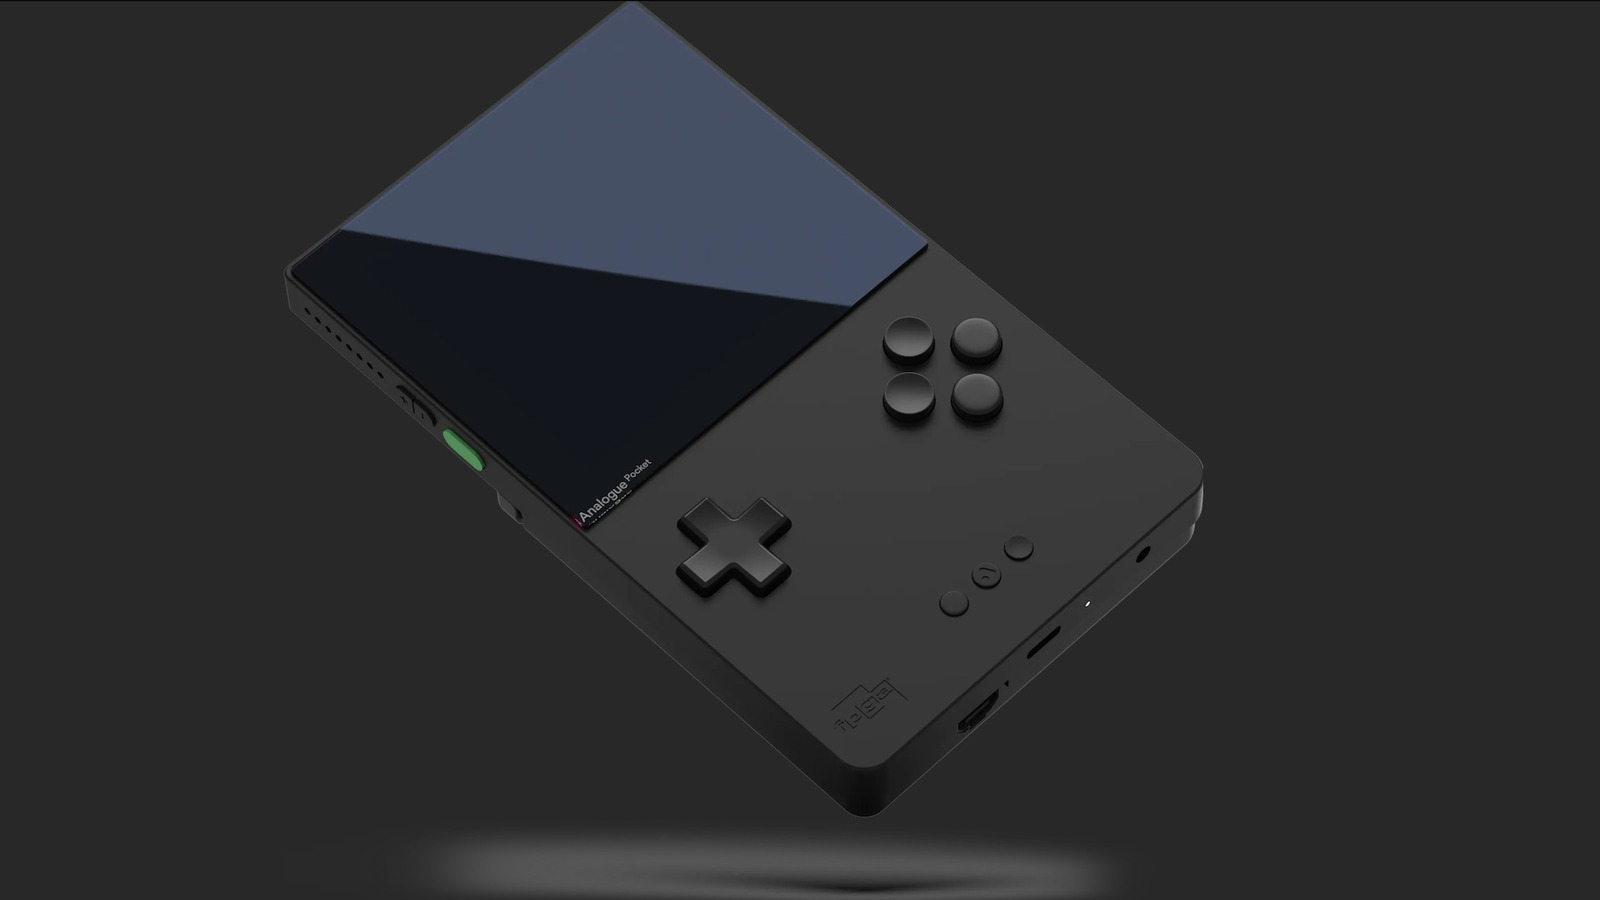 Analogue Pocket gets translucent colors, pre-orders coming soon - Polygon